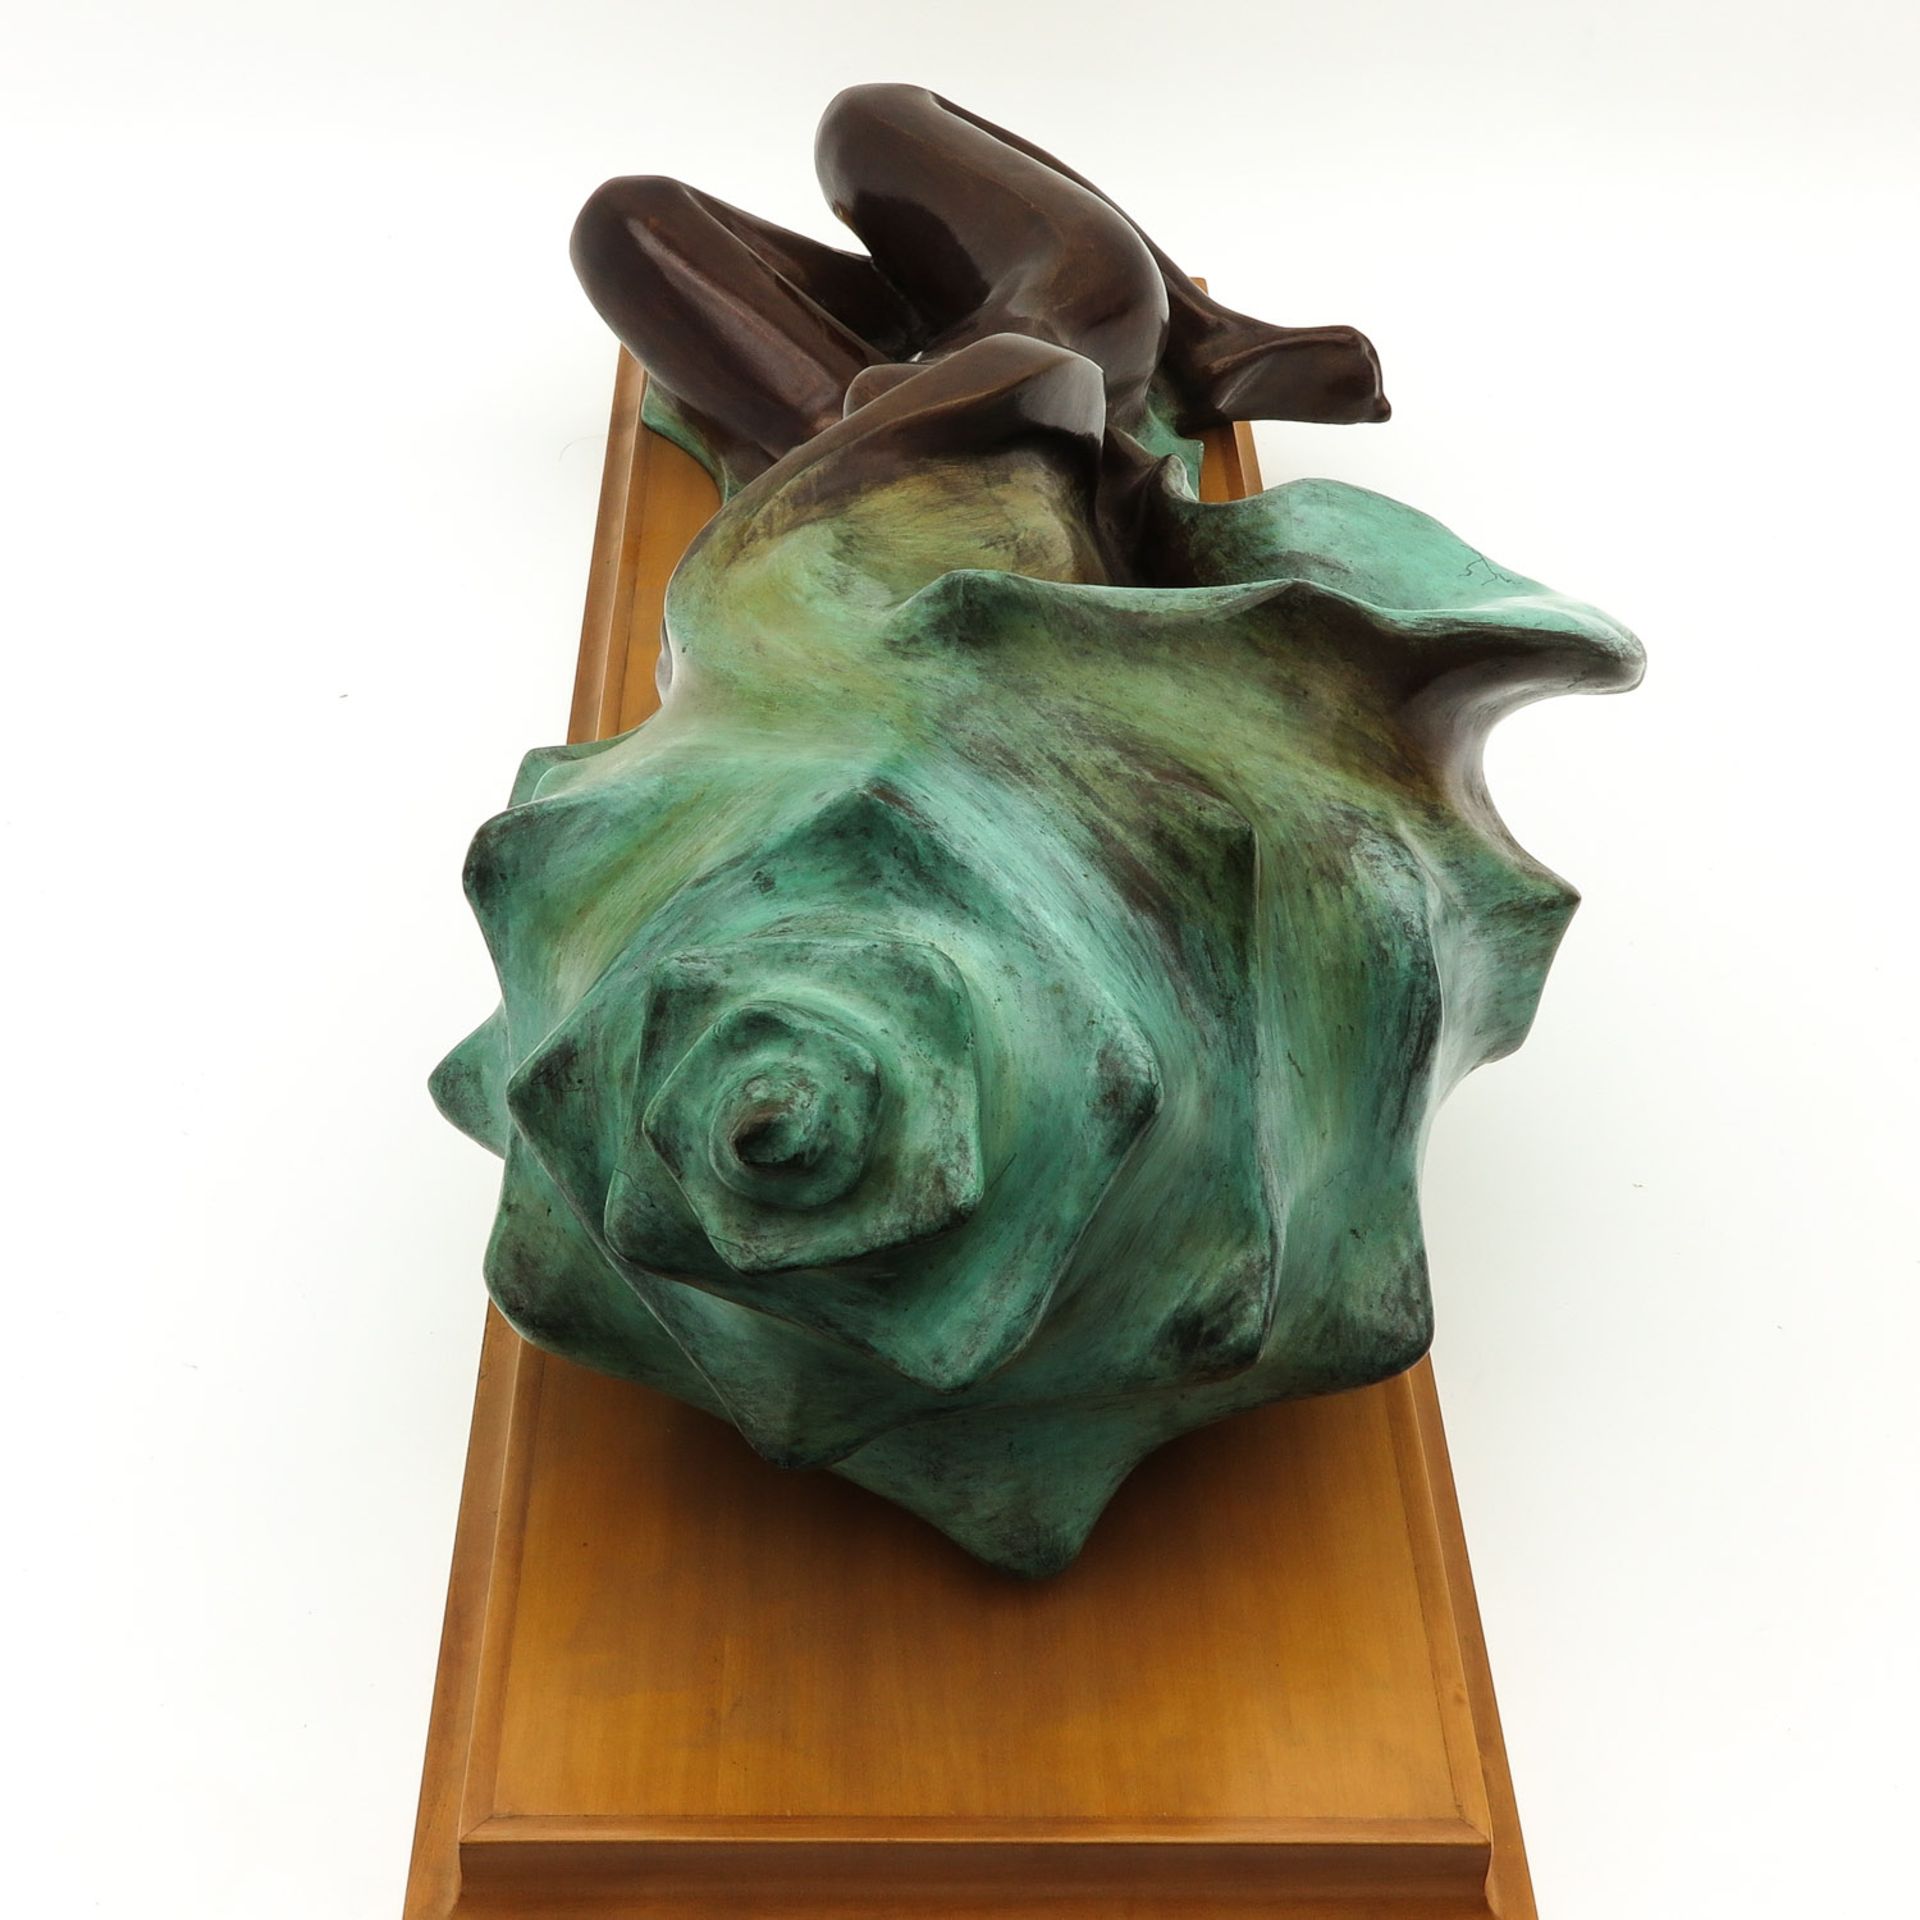 A Bronze Sculpture of Lady and Shell - Image 2 of 5